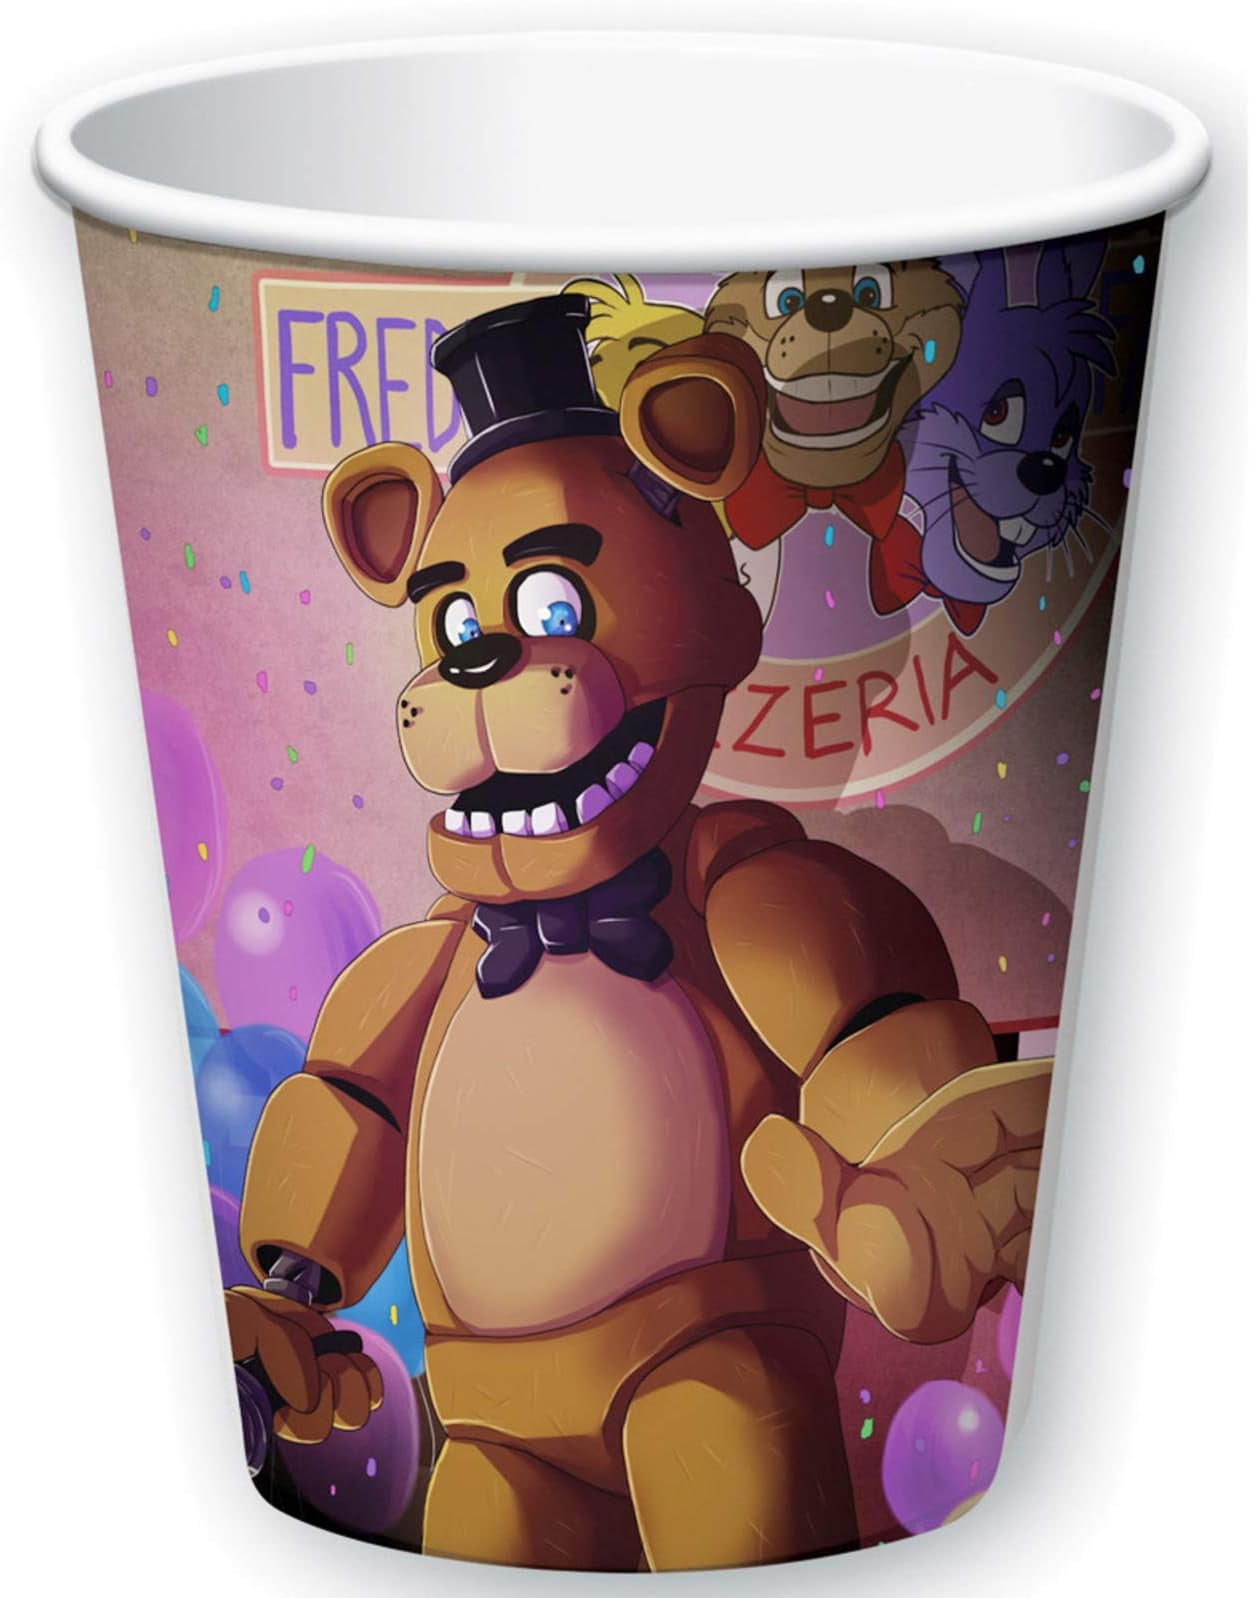 100 Five nights at Freddy's party ideas  five nights at freddy's, five  night, freddy